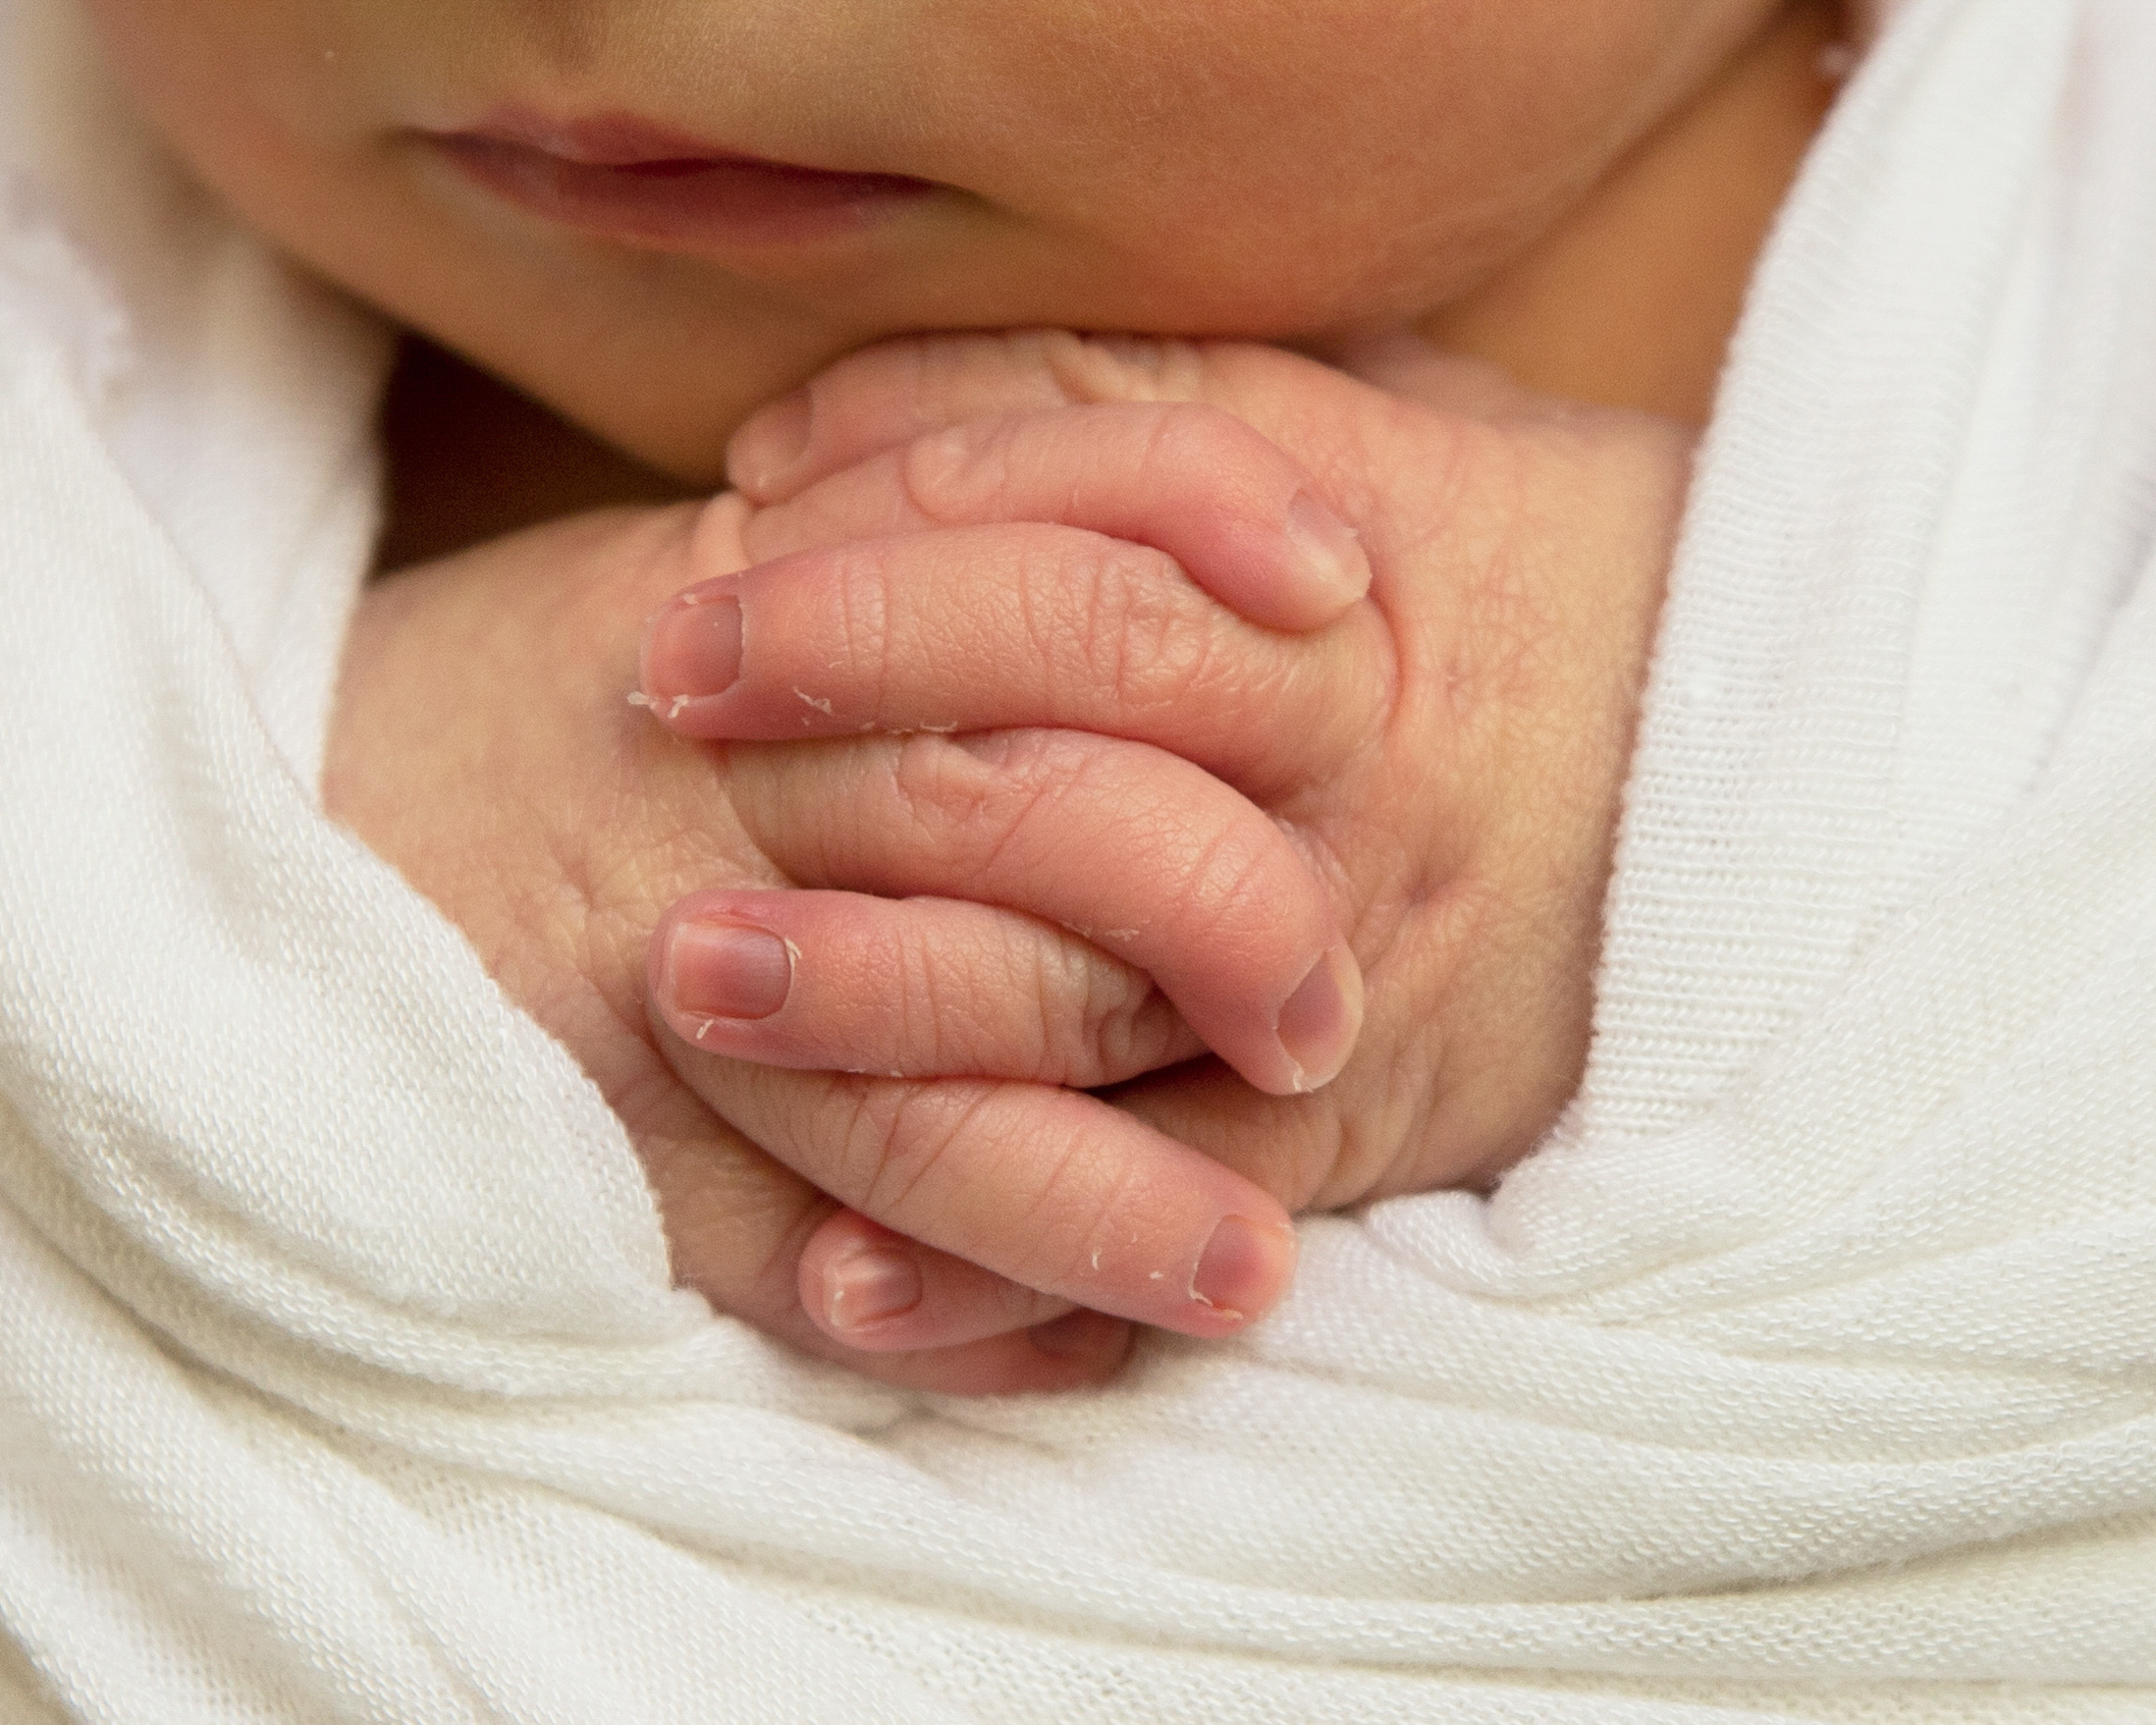 Close up photo of a newborn baby's hands in a white wrap